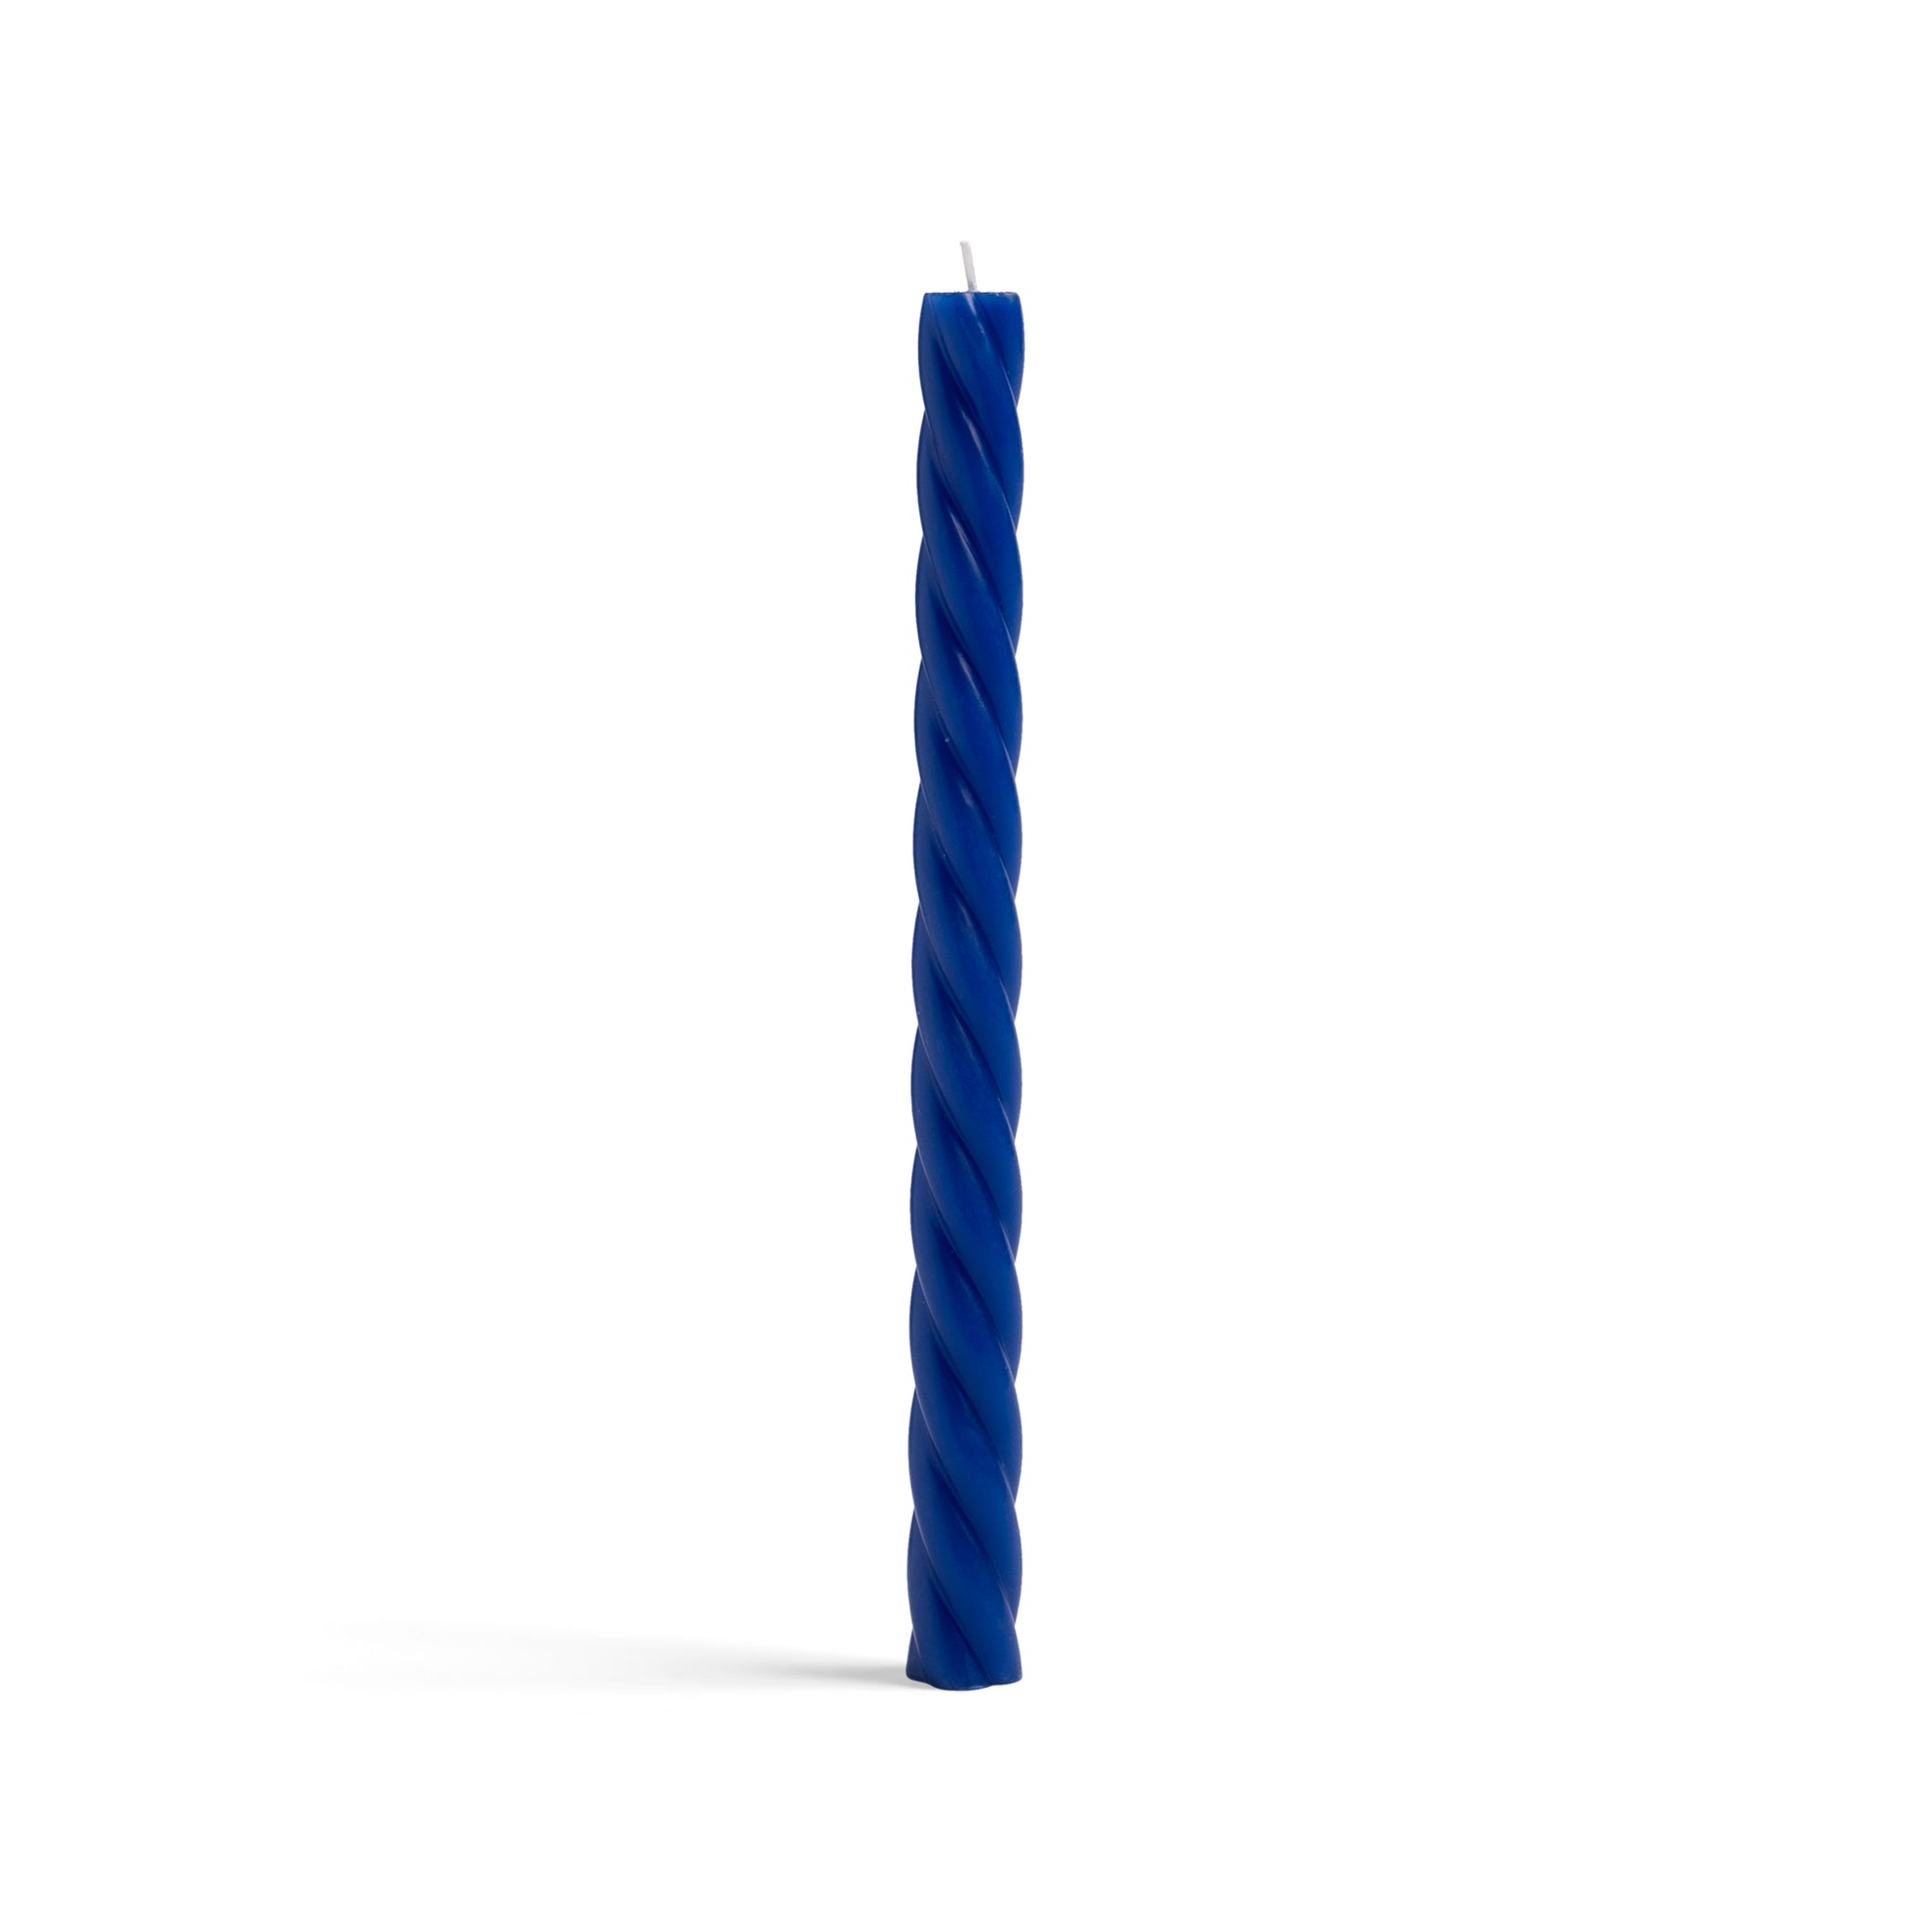 &k | MARSHMALLOW CANDLE - NAVY